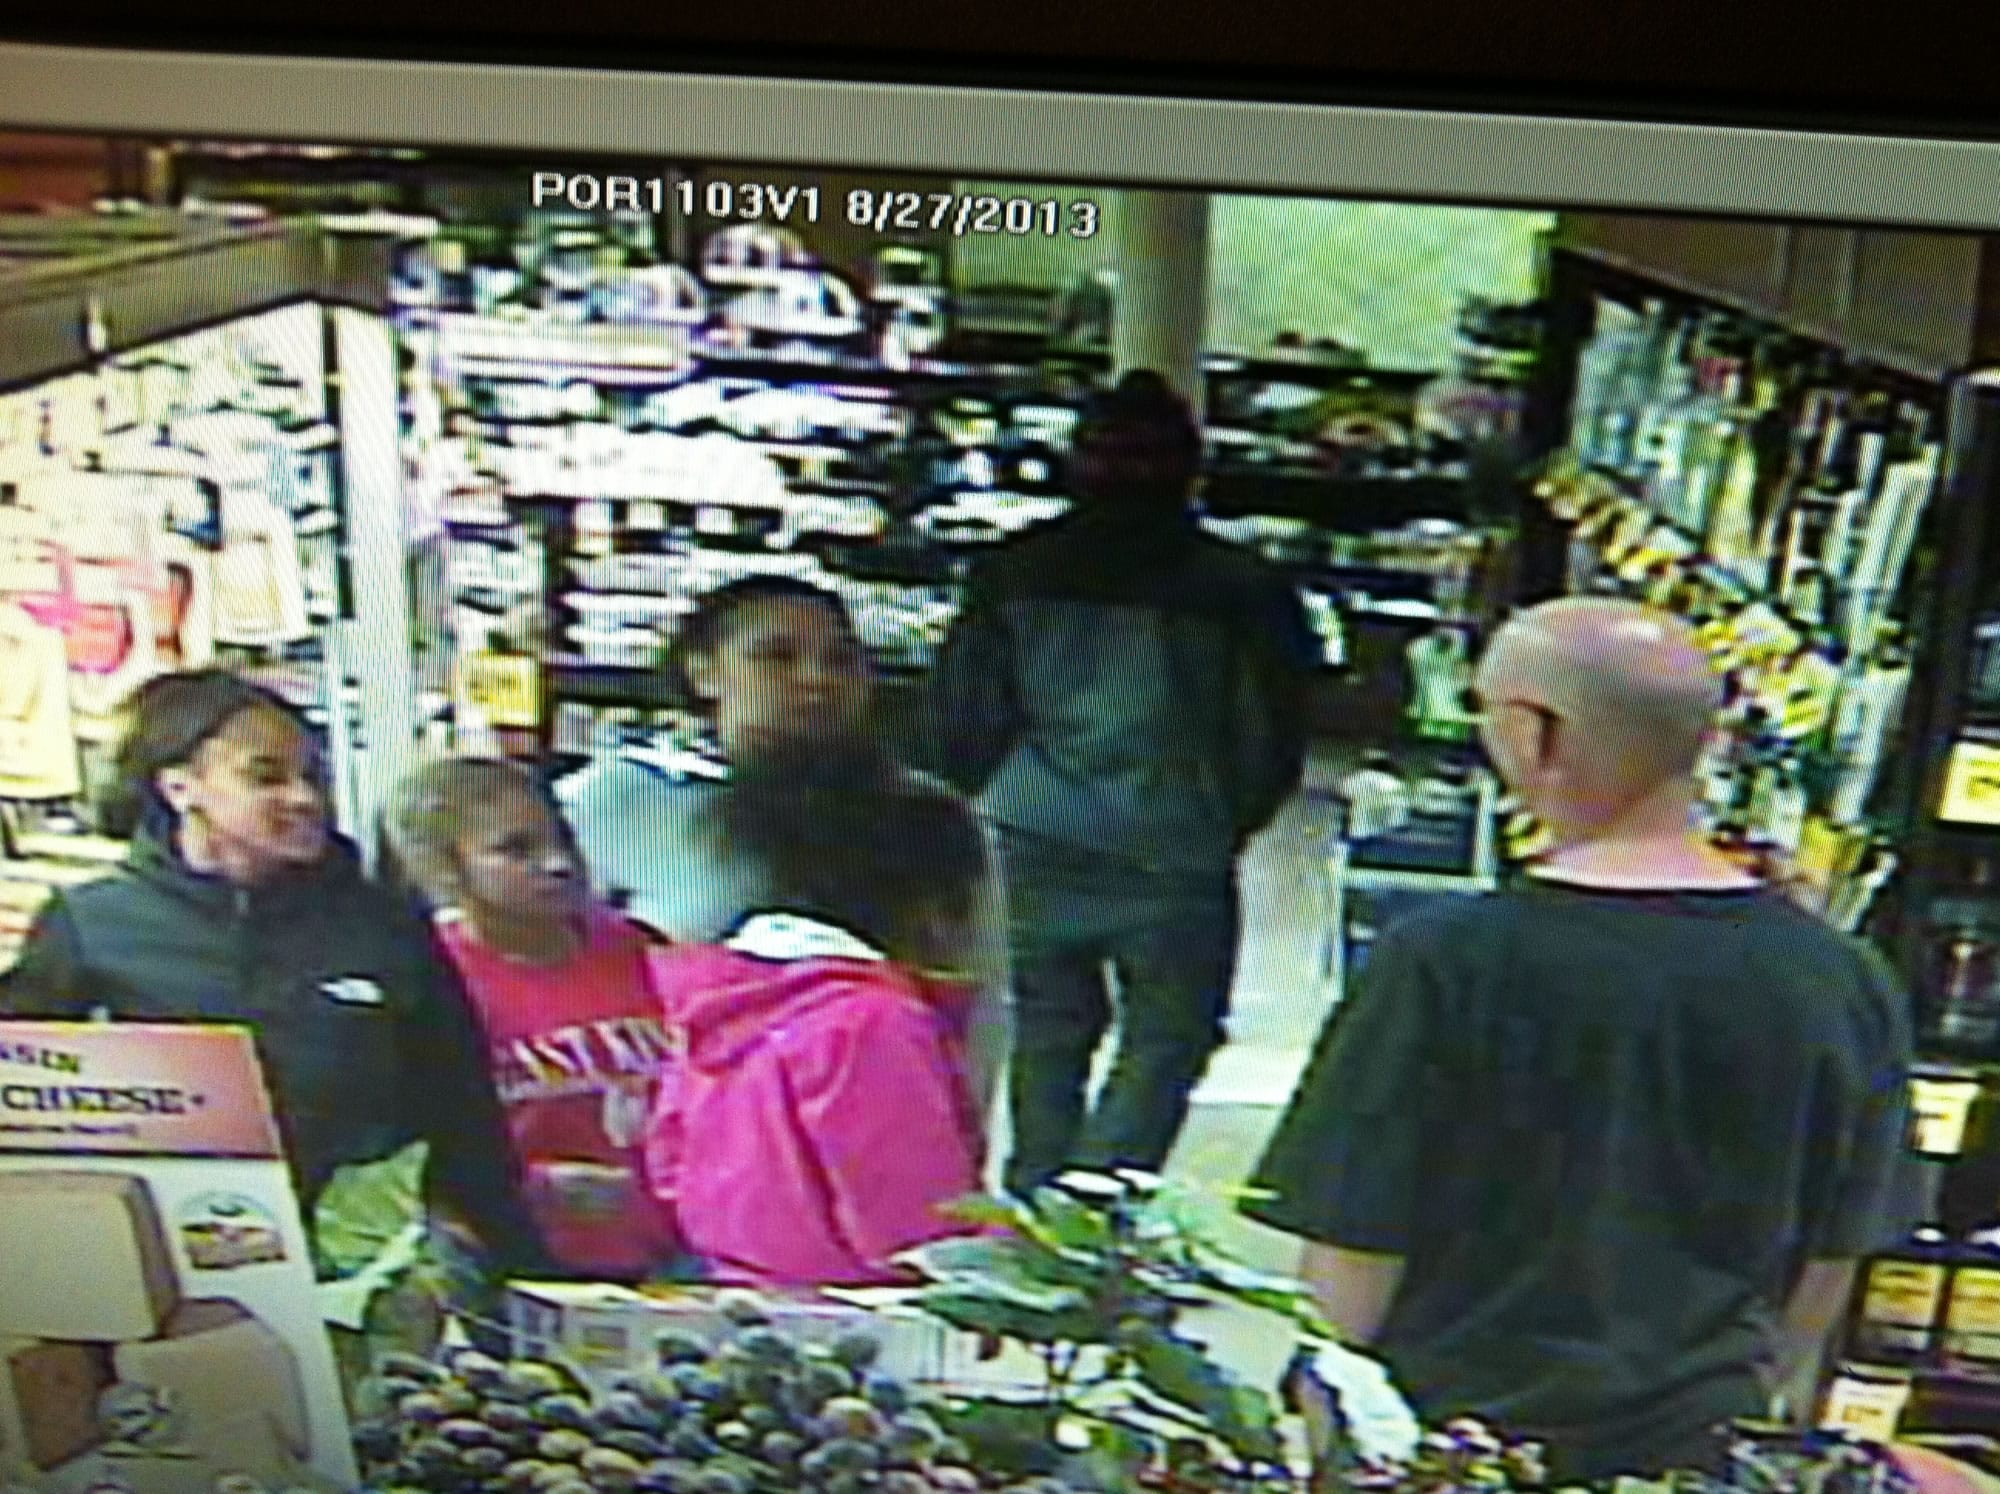 Anyone who recognizes these suspects, or if any involved subjects wishes to come forward, they are encouraged by police to call the agency at 360-487-7400.